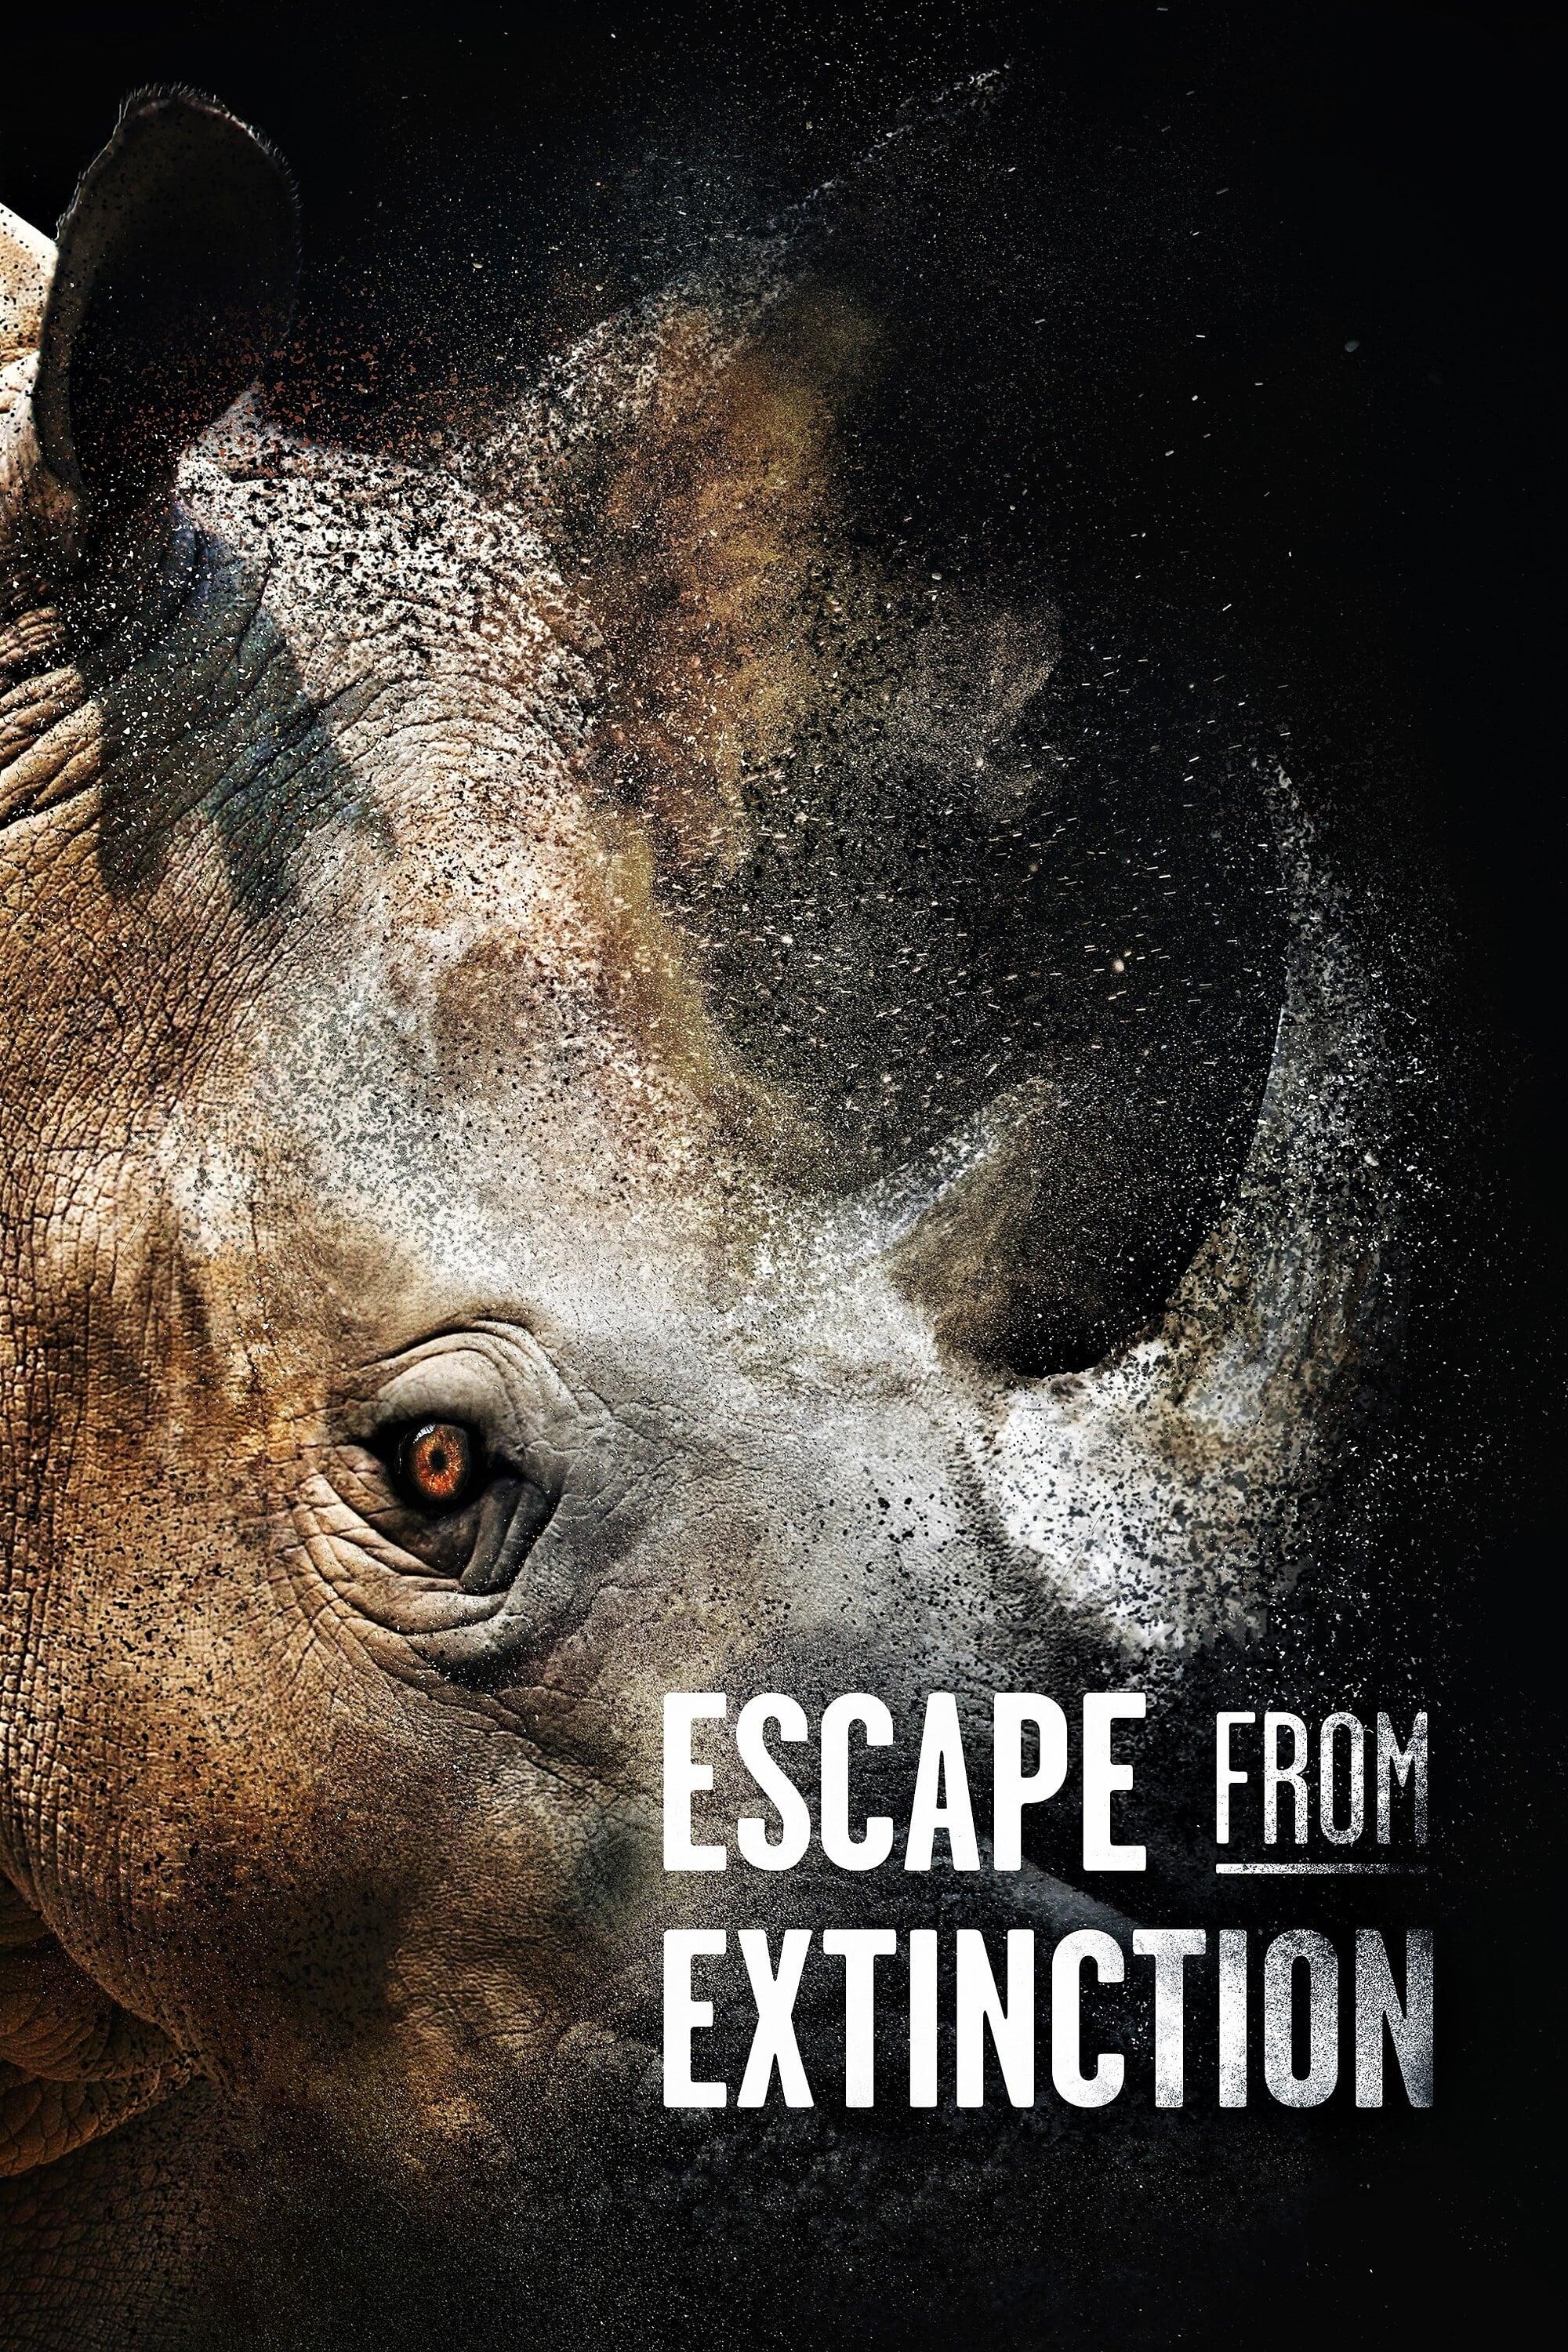 Escape from Extinction poster